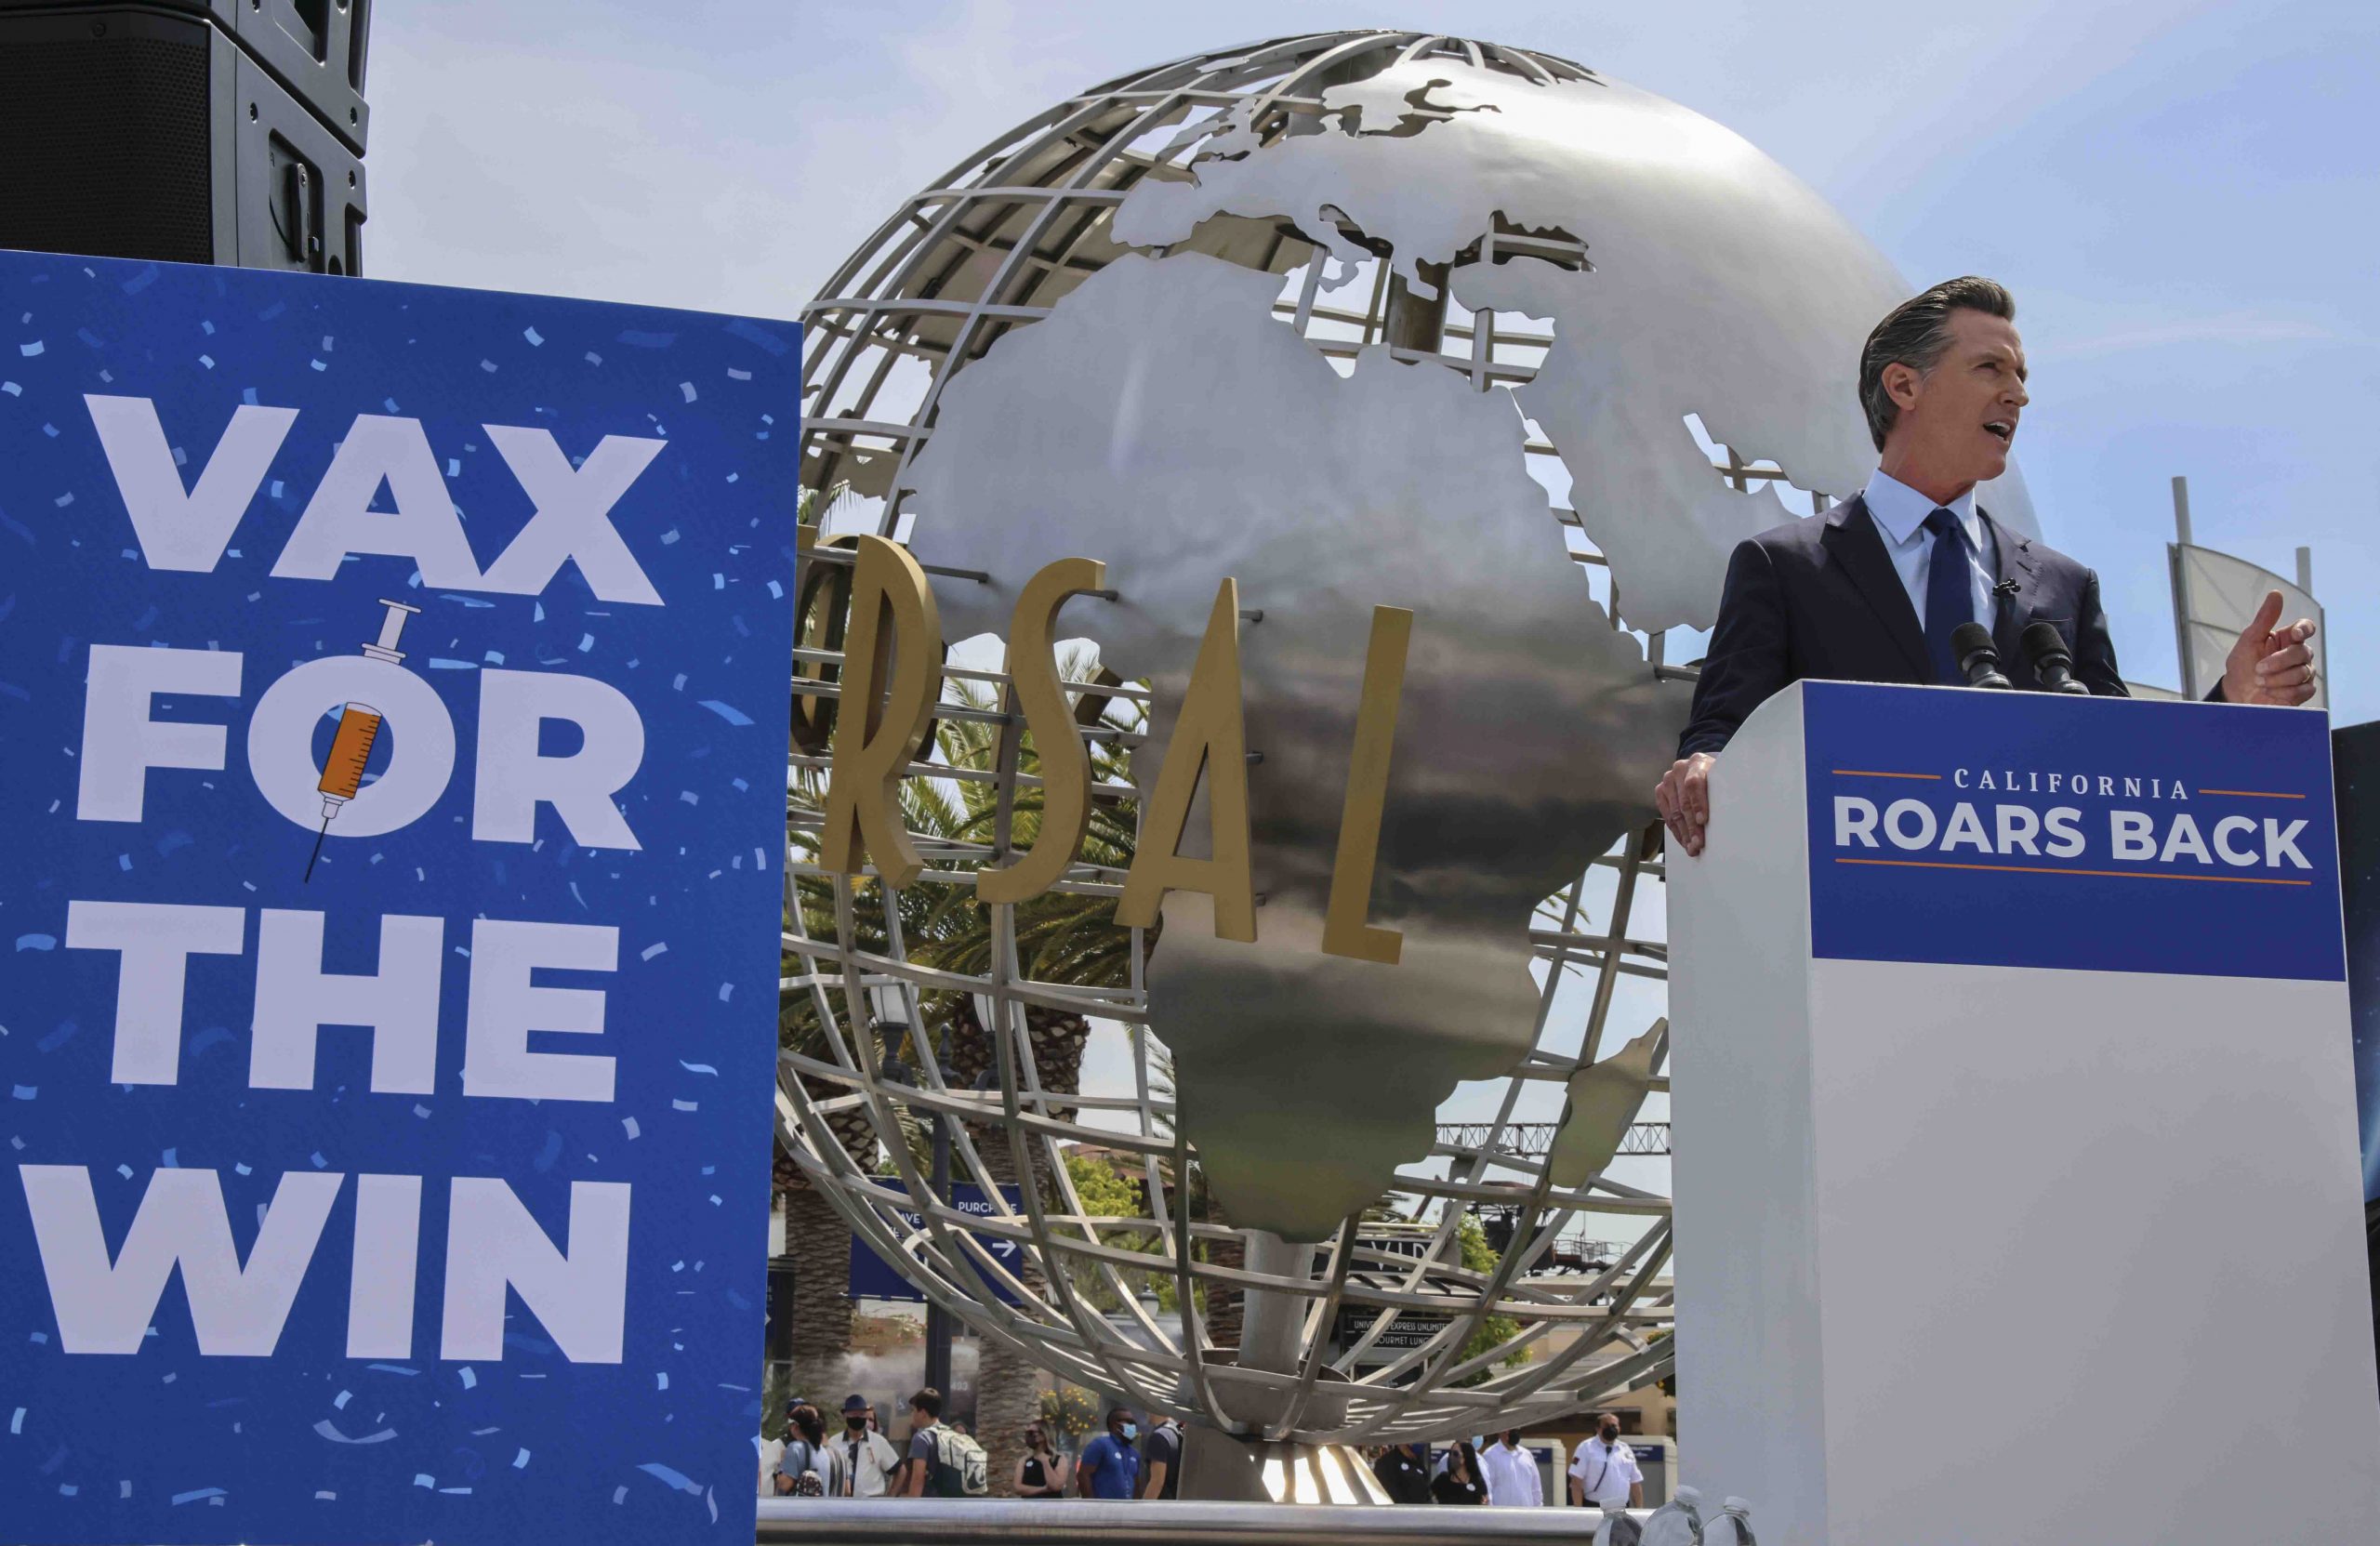 California Roars Back At Universal Studios Hollywood Governor Newsom Ushers In State S Full Reopening And Draws 15 Million In Vax For The Win Grand Prizes California Governor